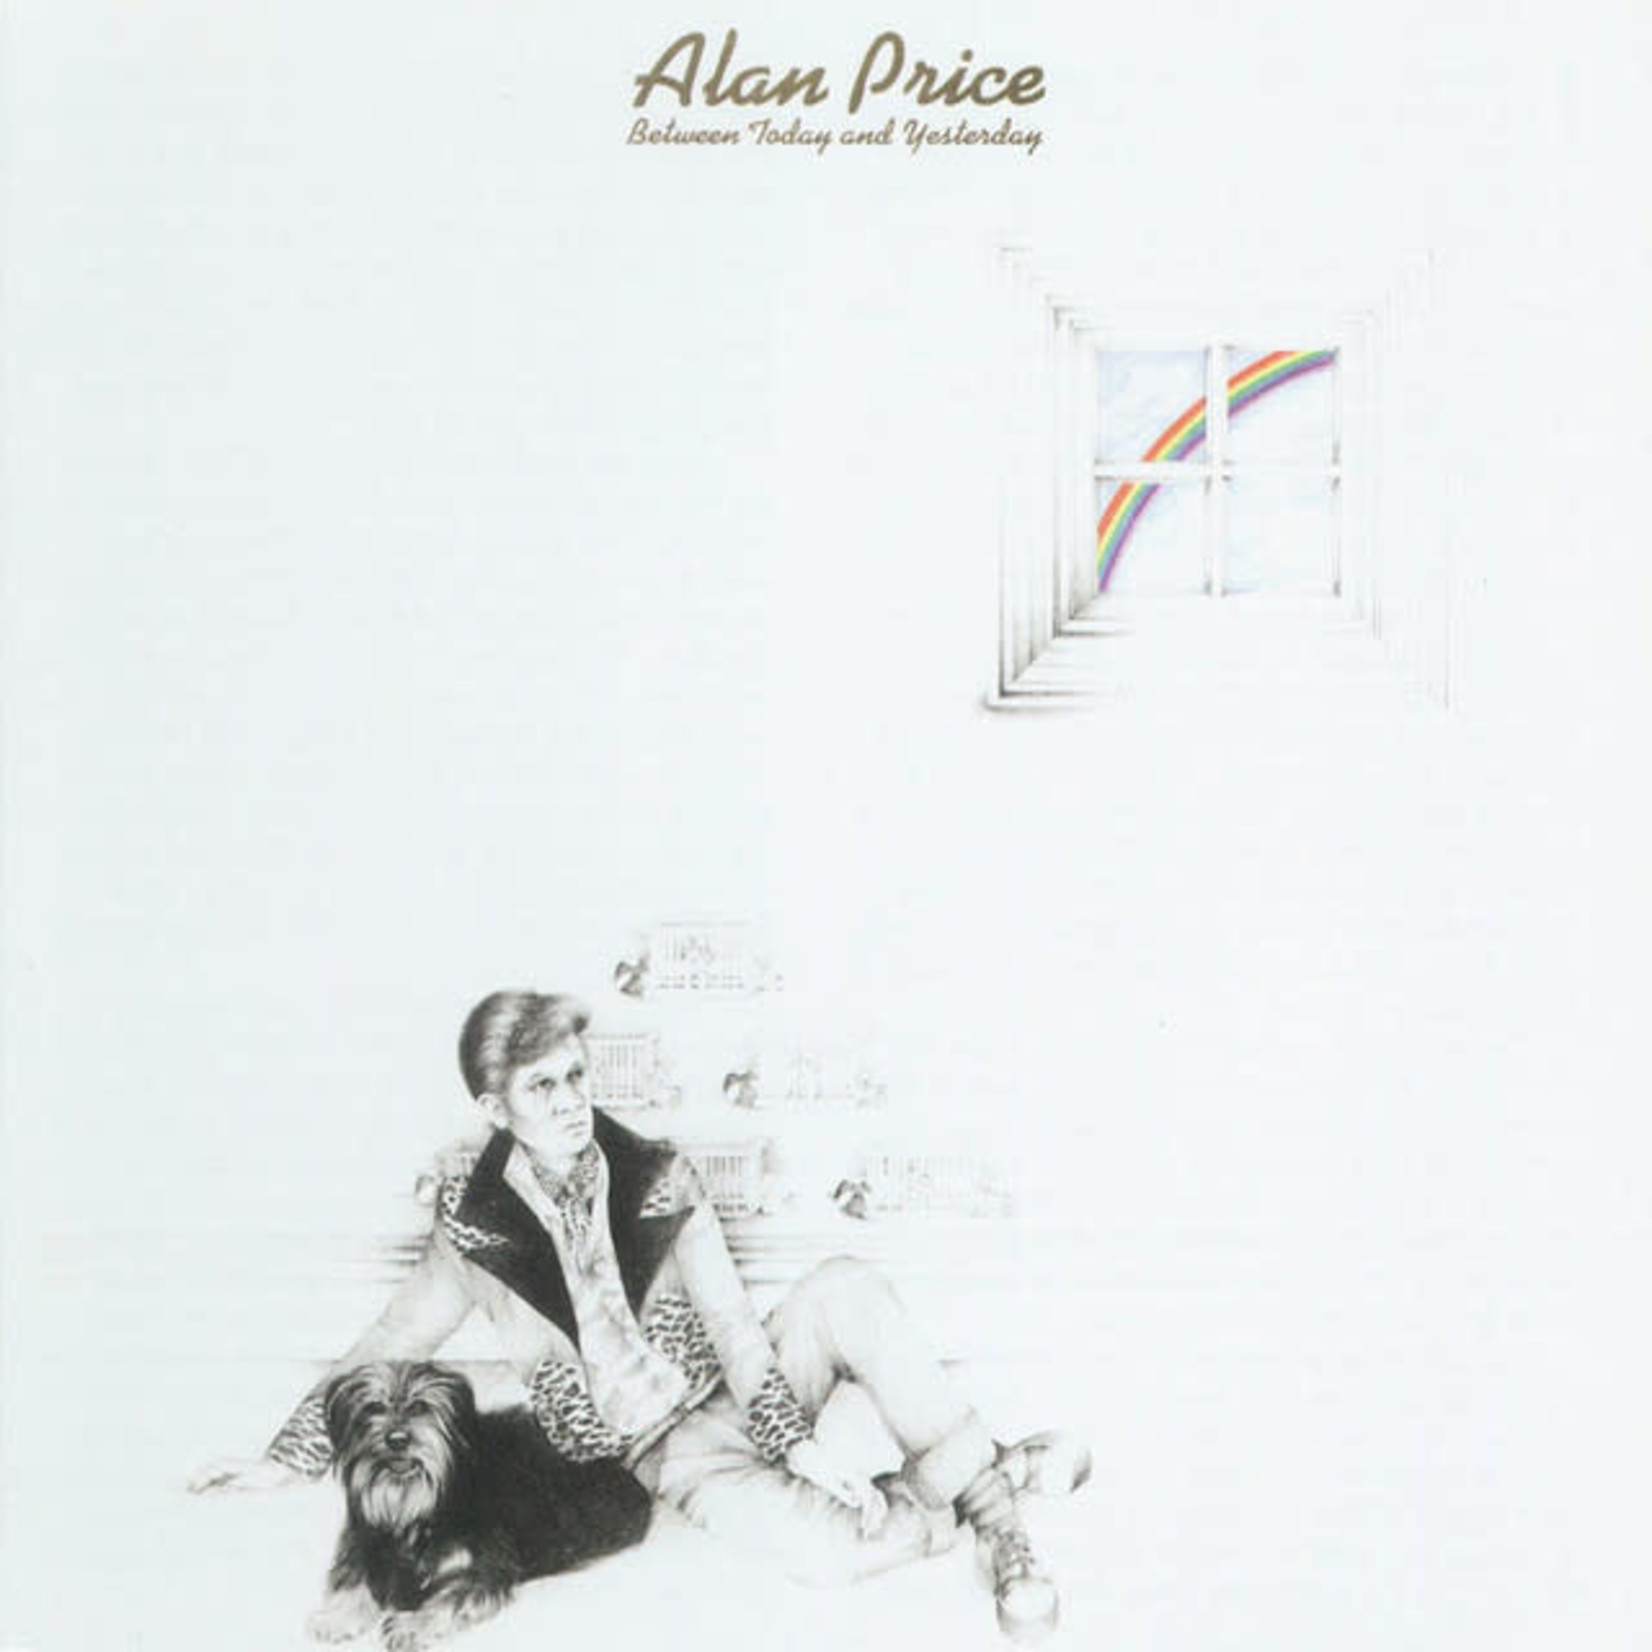 [Vintage] Alan Price - Between Today & Yesterday